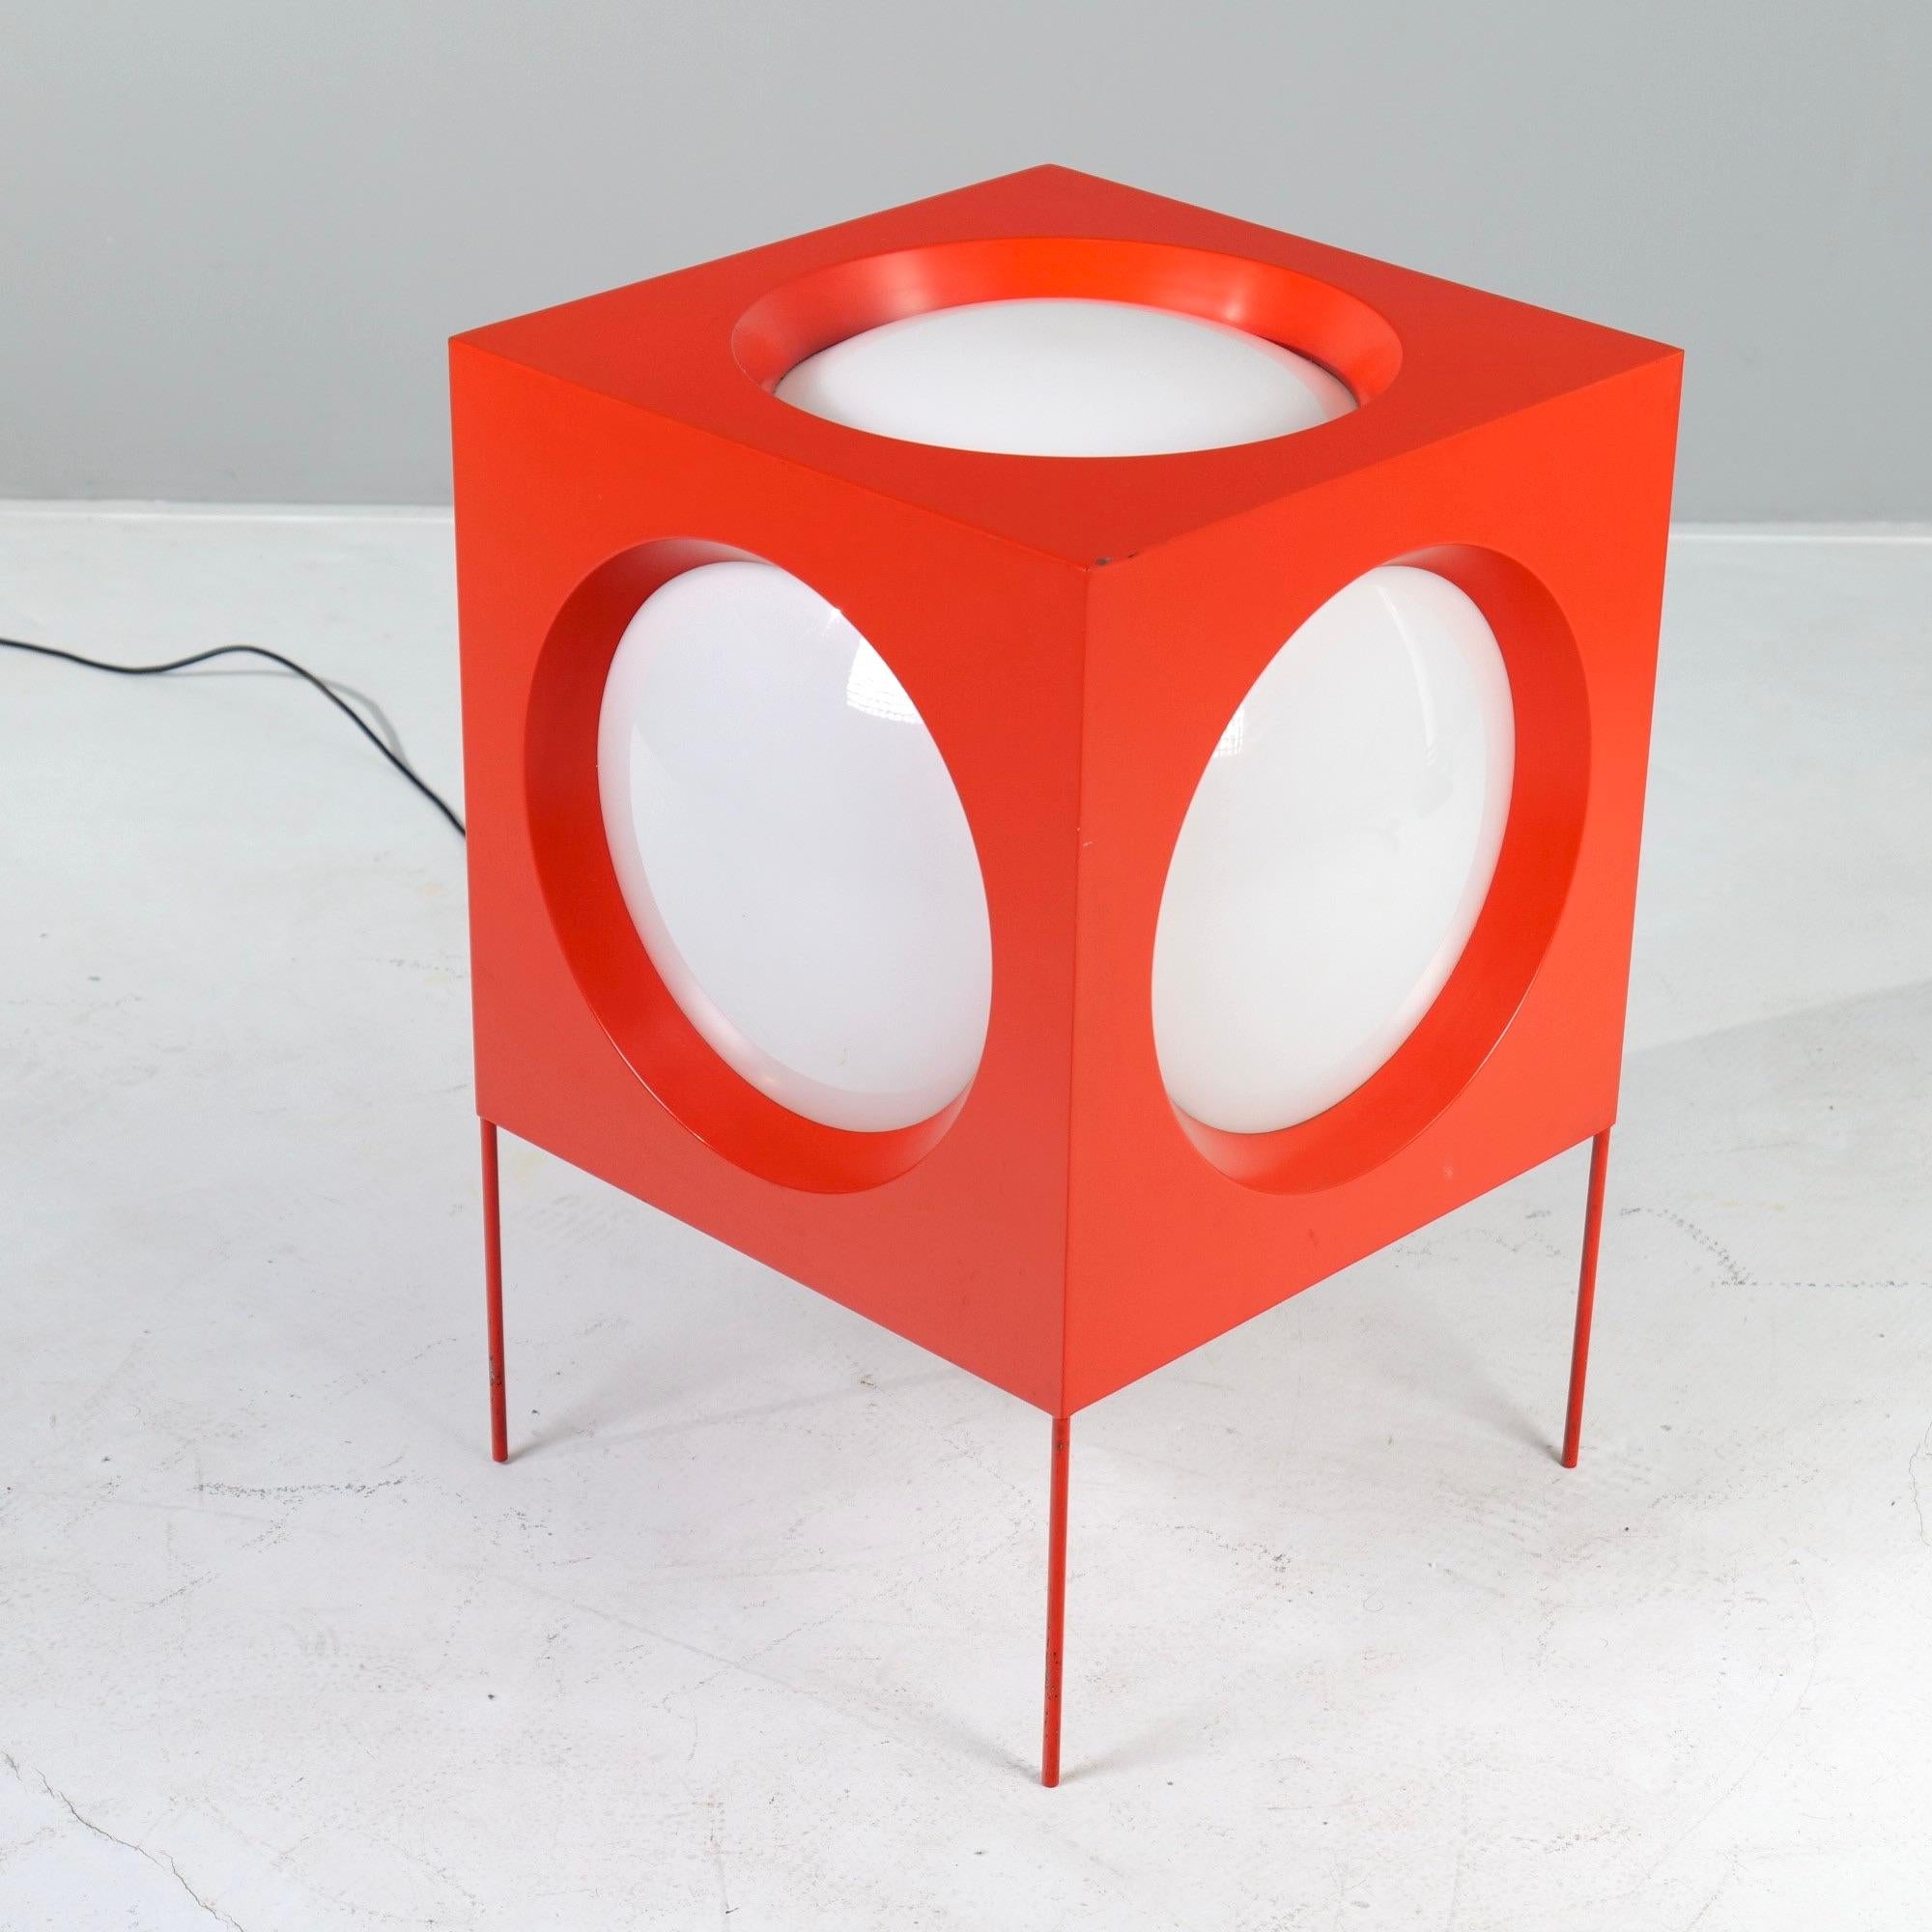 Iconic big Helvetica cube floor lamp by Carl Moor. 
Good condition with patina on the lacquer.

Original ontouched condition.

Made in 1960's - Switzerland